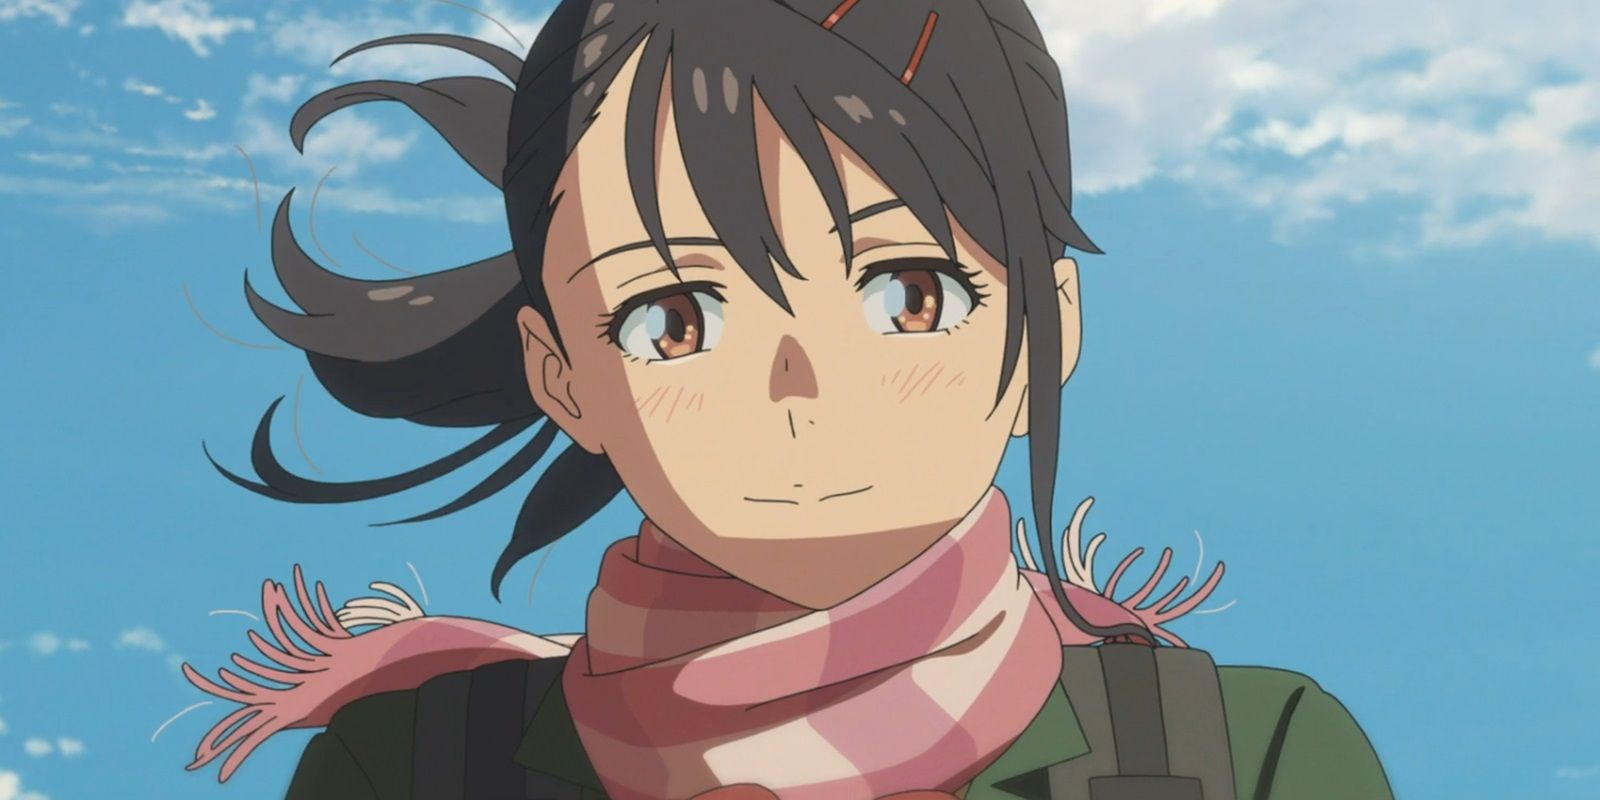 Suzume in the final scene of the film, smiling warmly while her hair and a scarf blow in the wind during a sunny day.